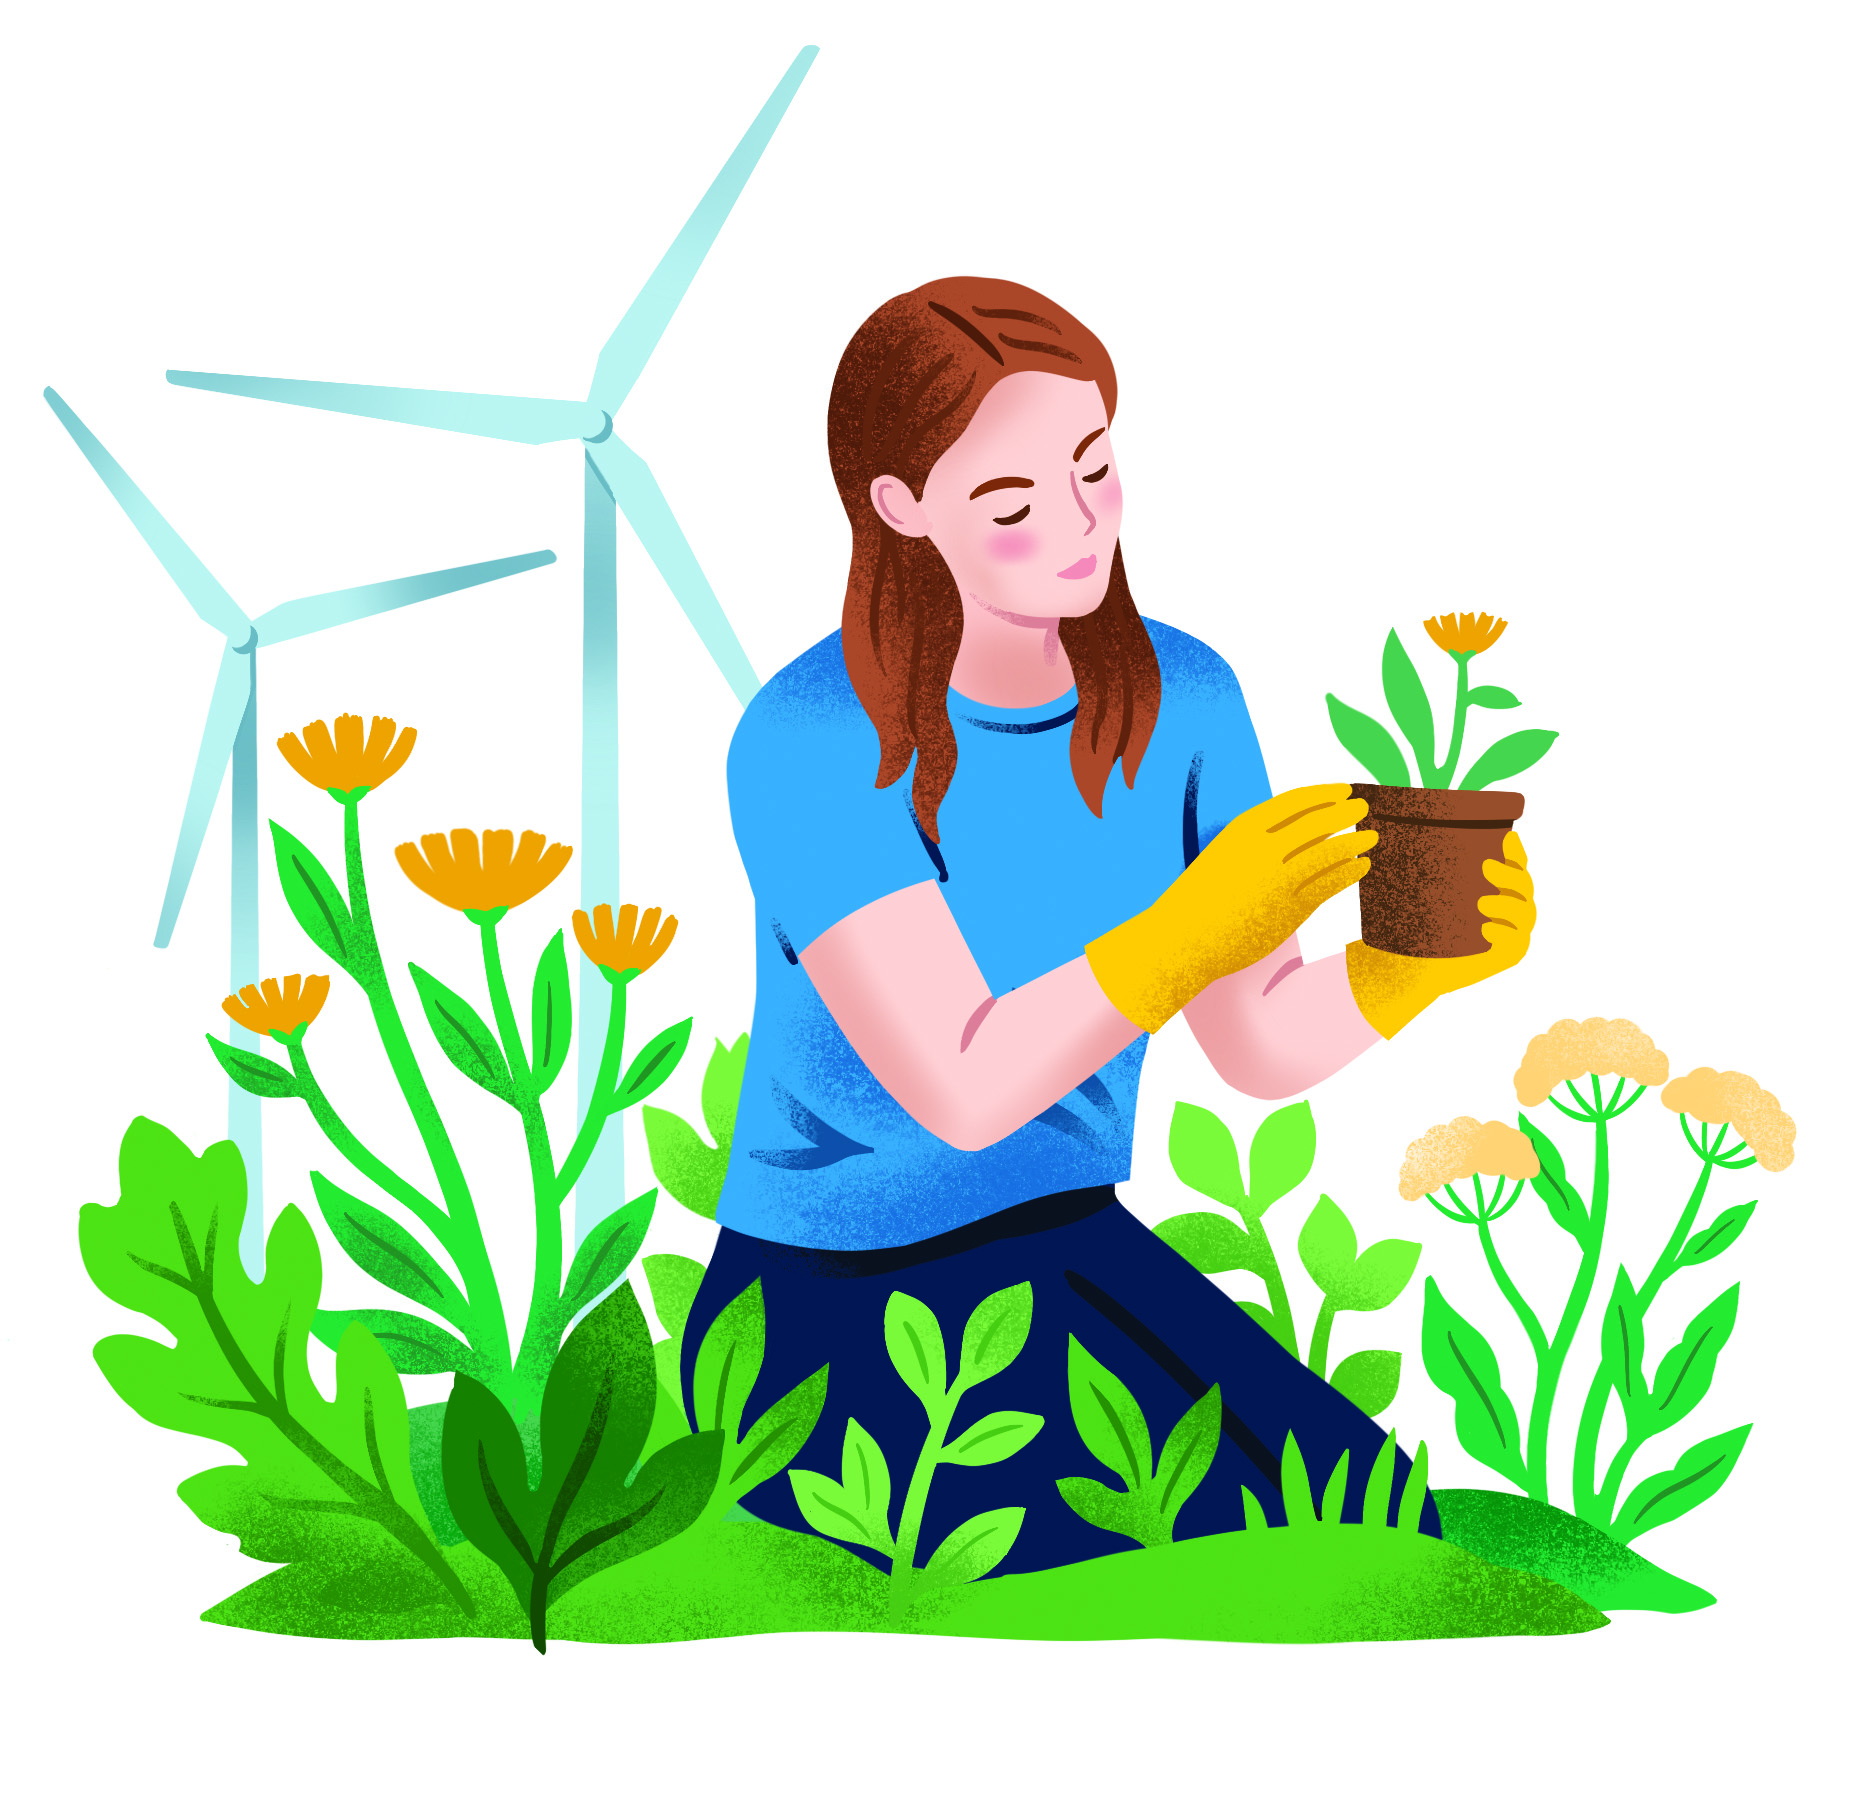 Illustration of a white woman with light brown hair in a blue shirt and yellow gloves kneeling in a garden with yellow and green flowers with wind turbines behind her.